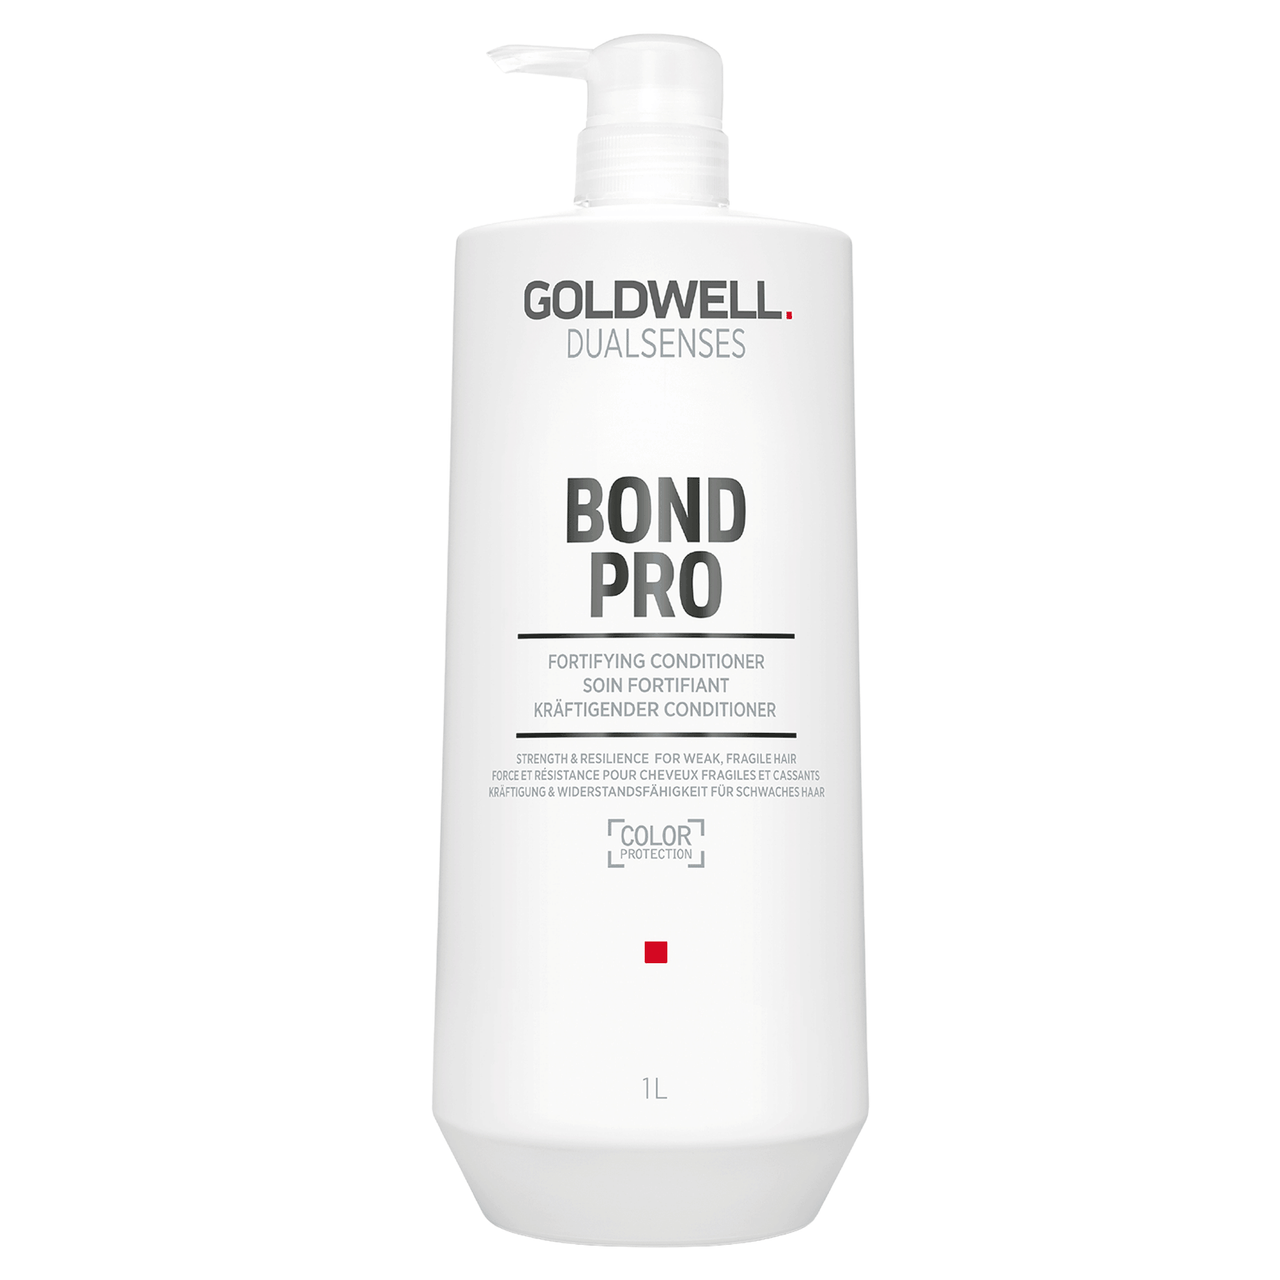 Goldwell  Bond Pro Fortifying Conditioner 33.8 fl oz